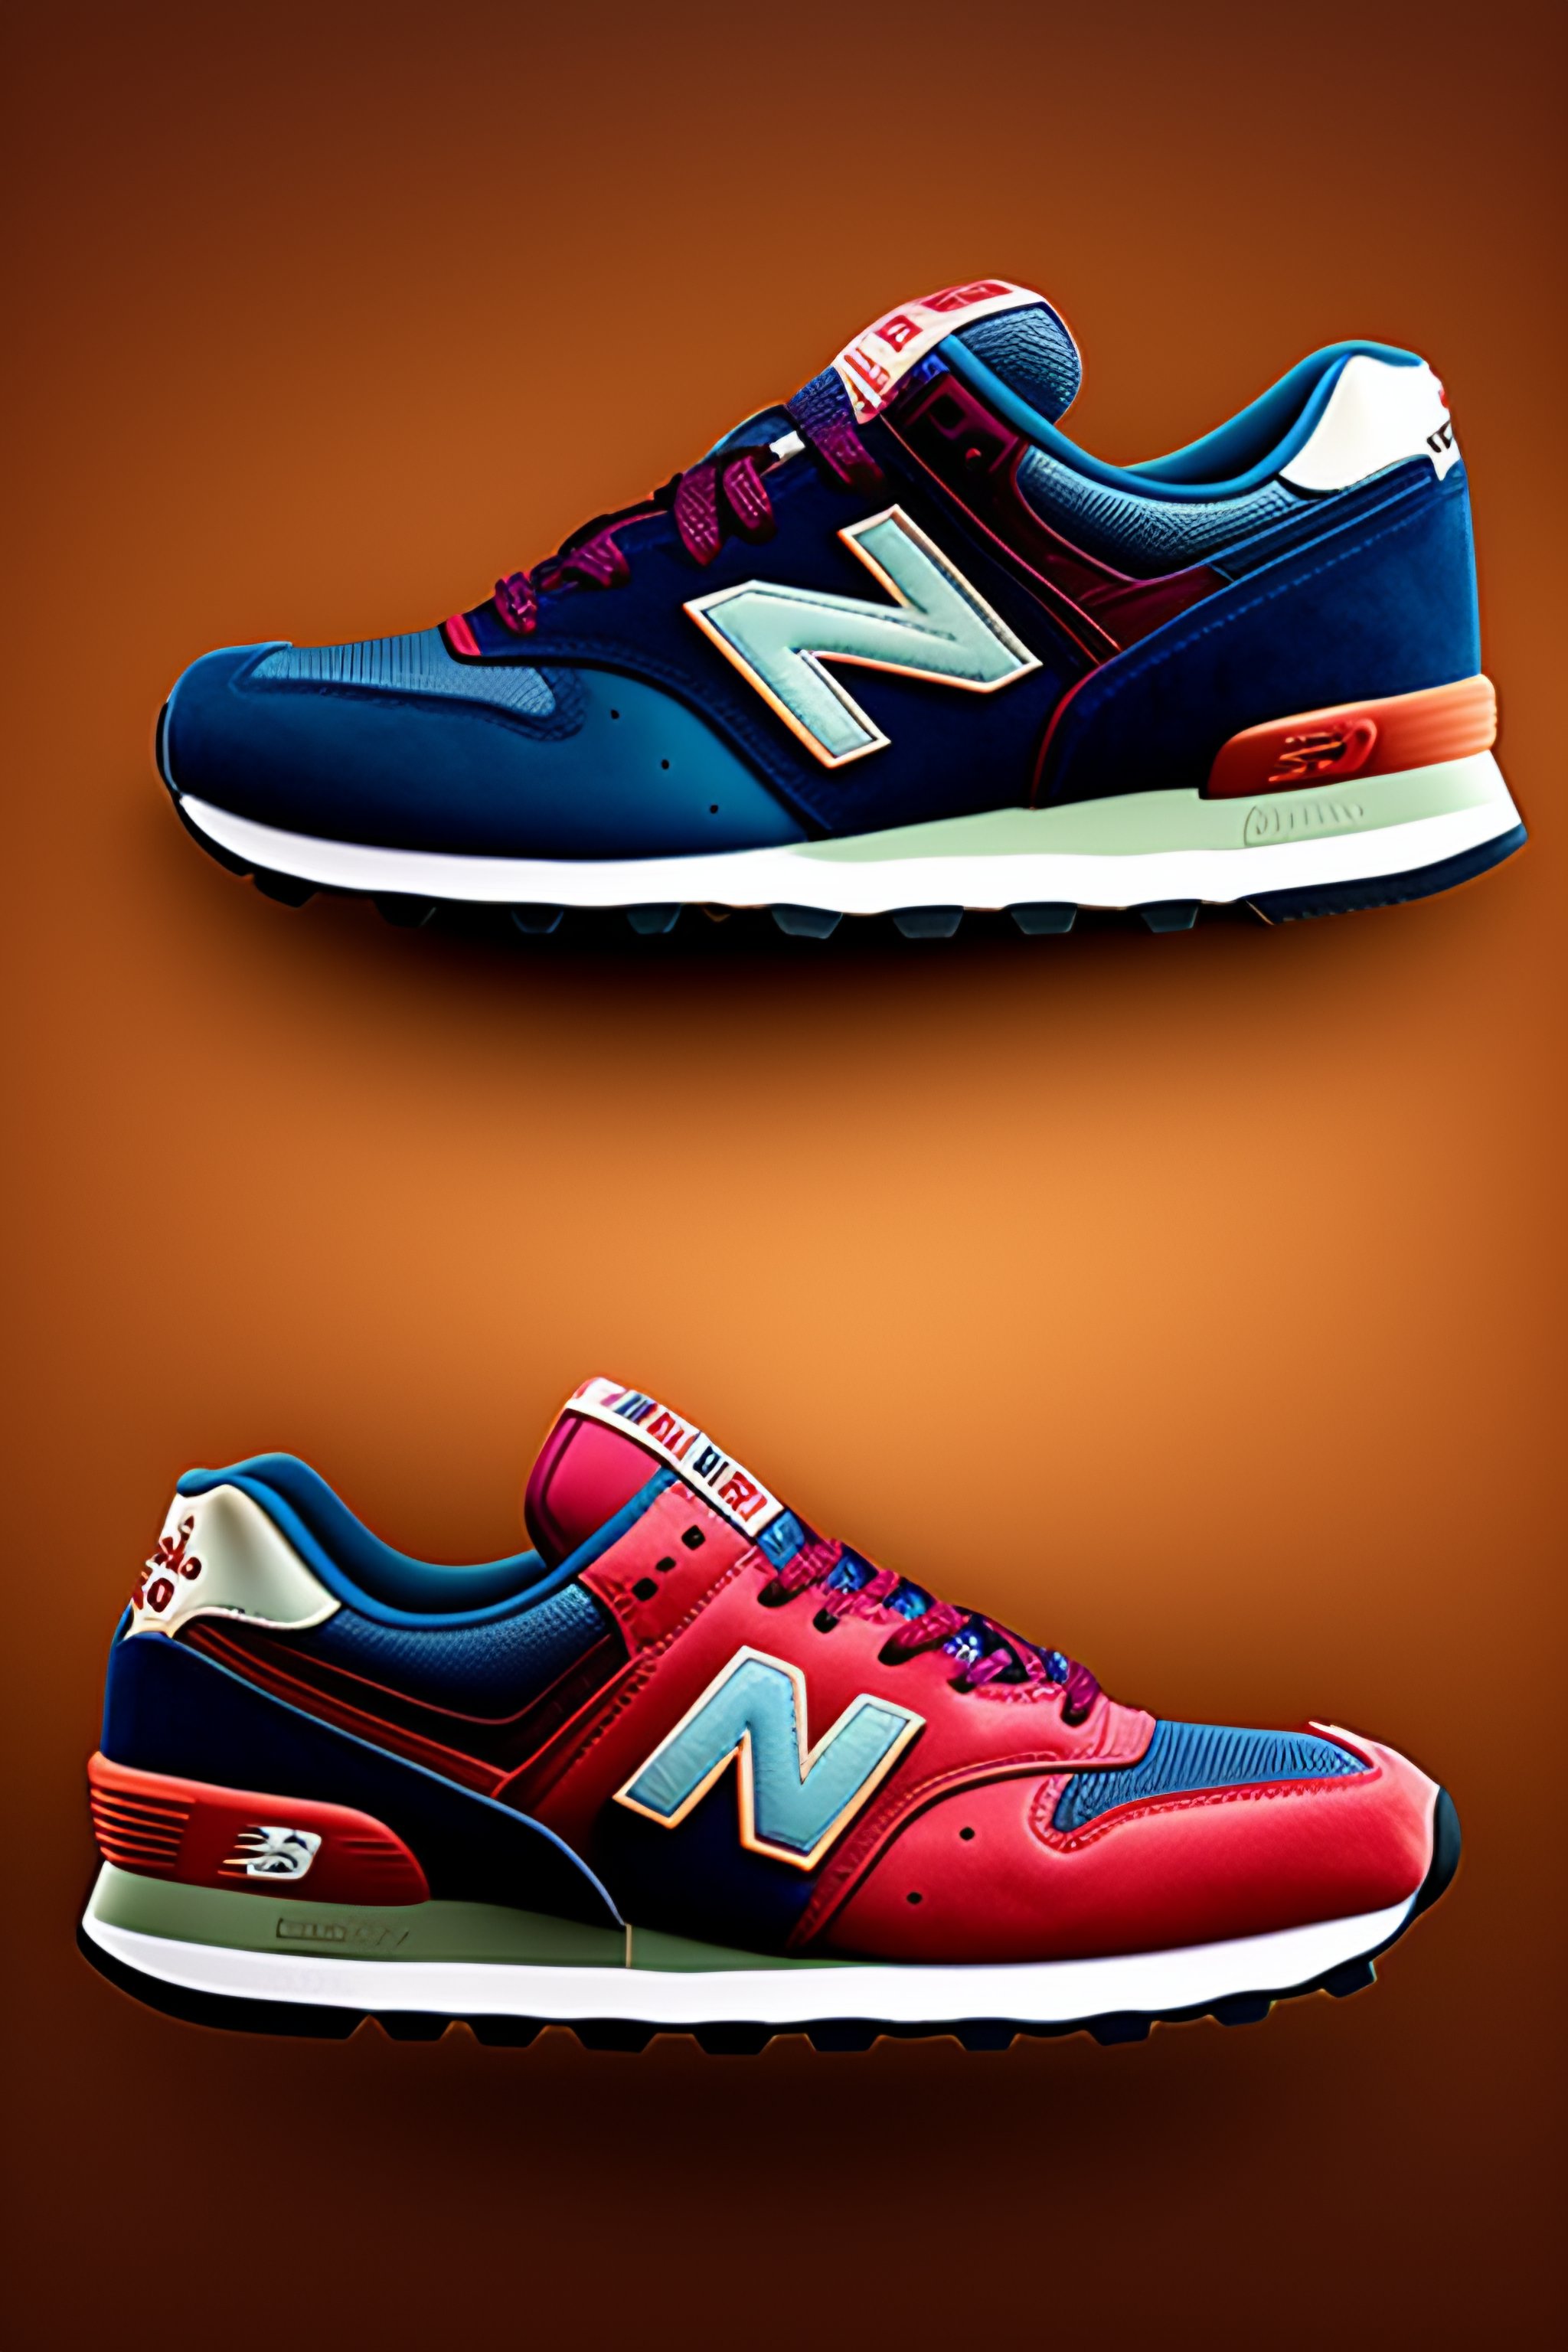 Lexica - New balance shoes